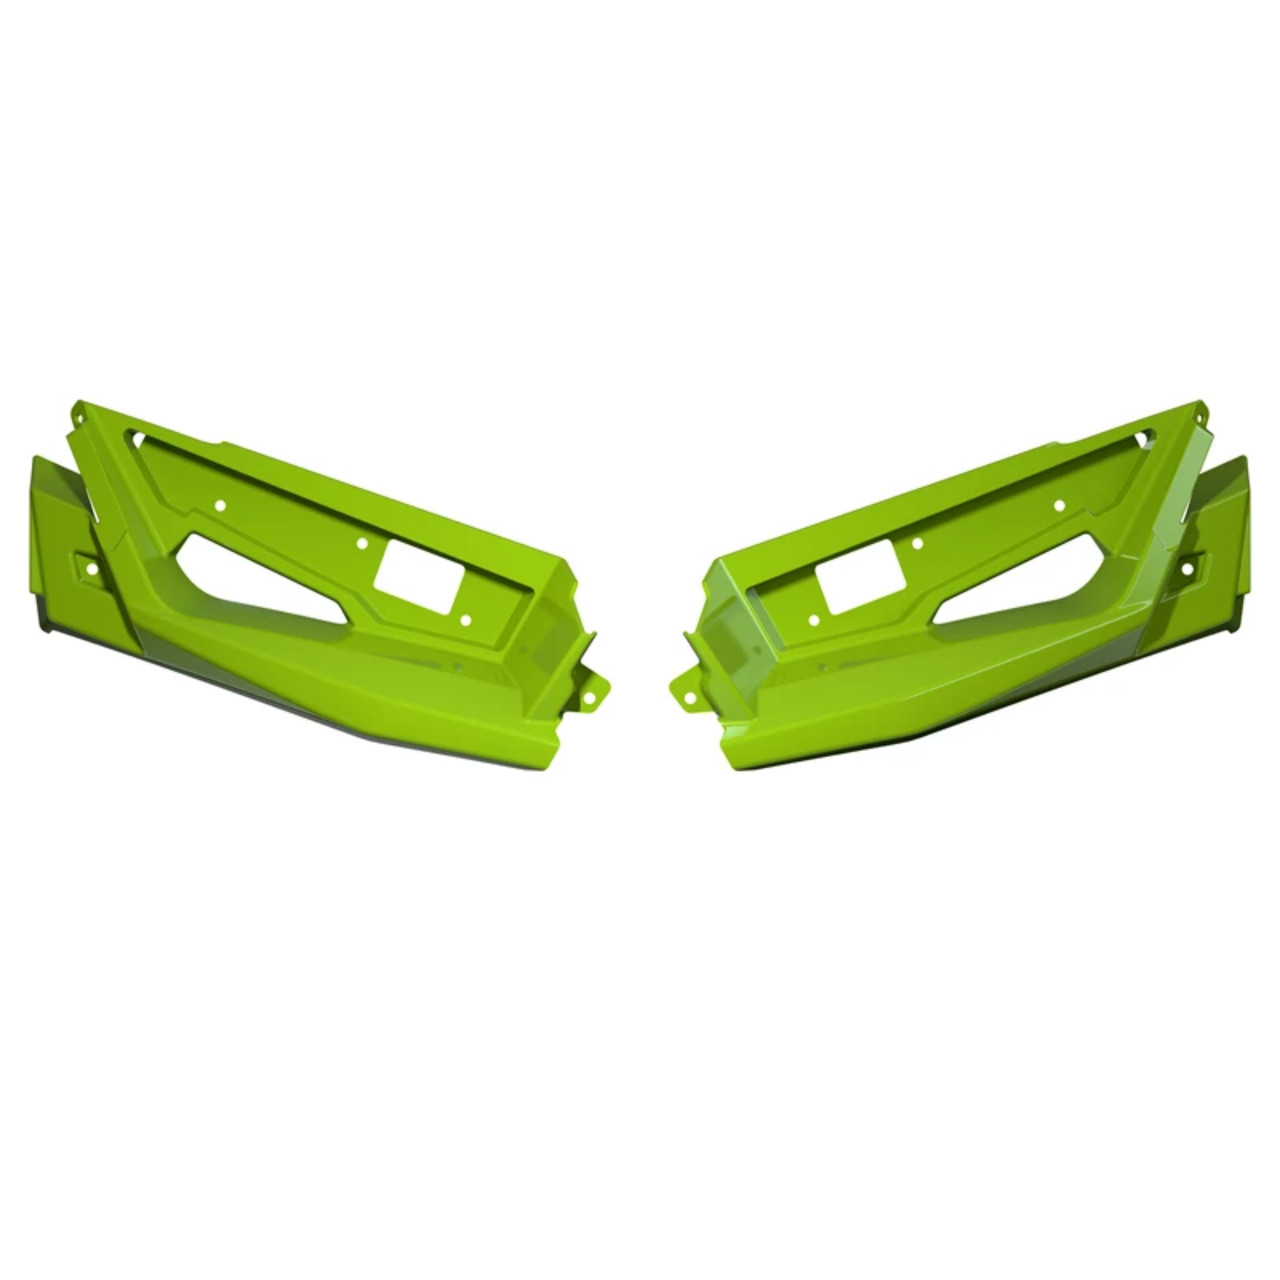 Polaris New OEM Liquid Lime Painted Front Upper Accent Panel, 2884604-772